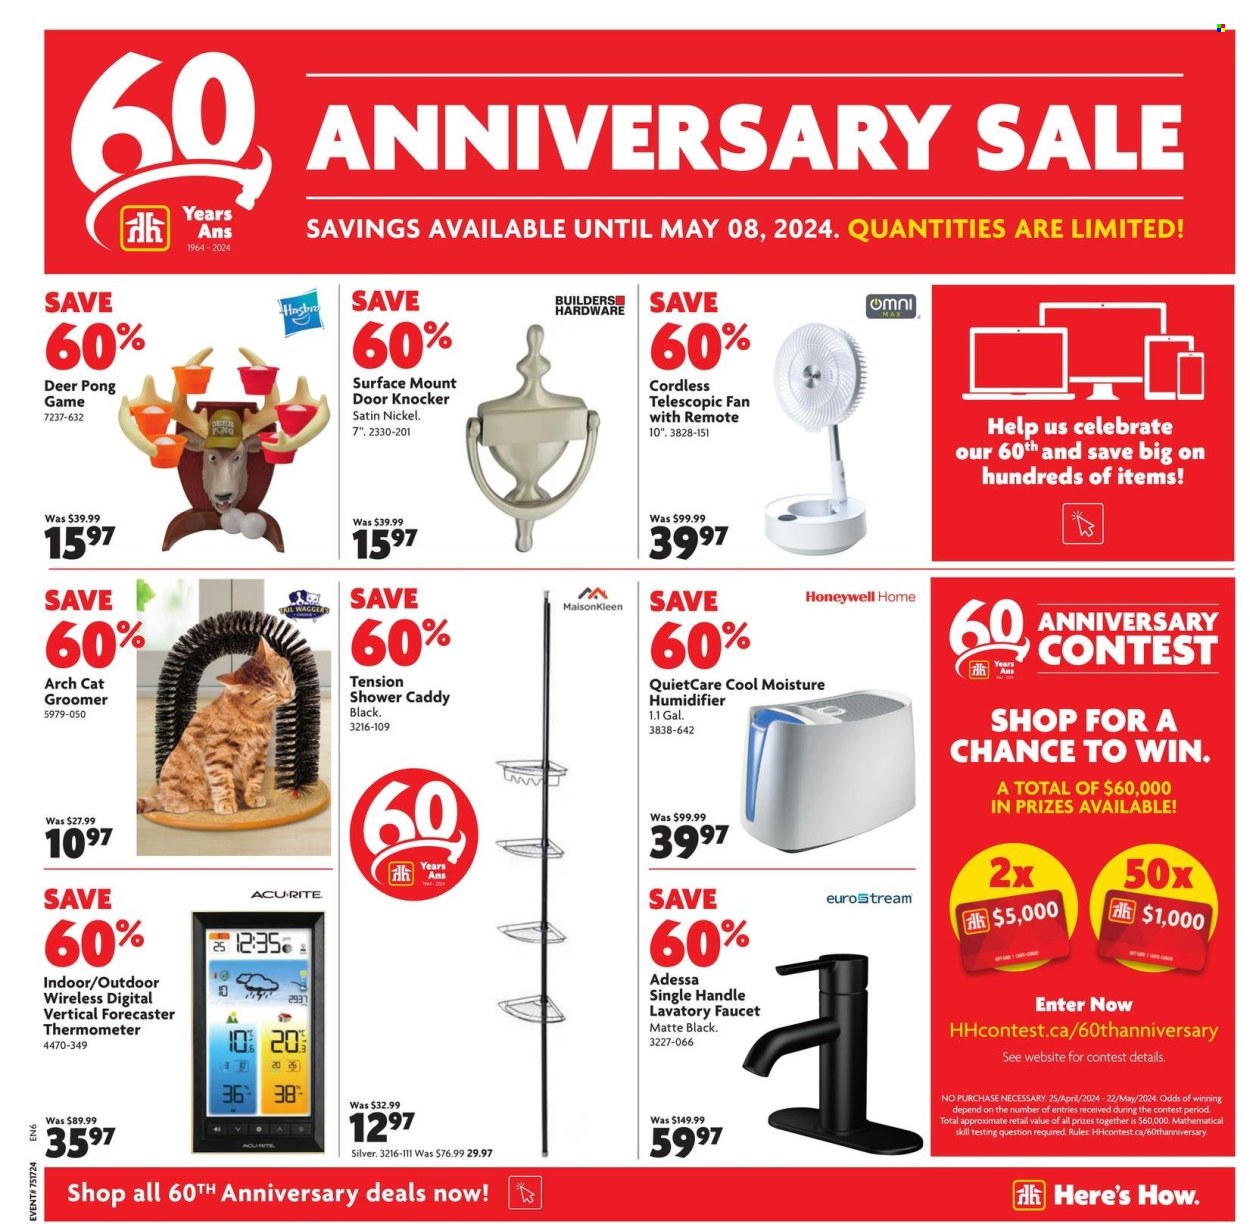 Home Hardware Building Centre flyer  - April 25, 2024 - May 08, 2024.